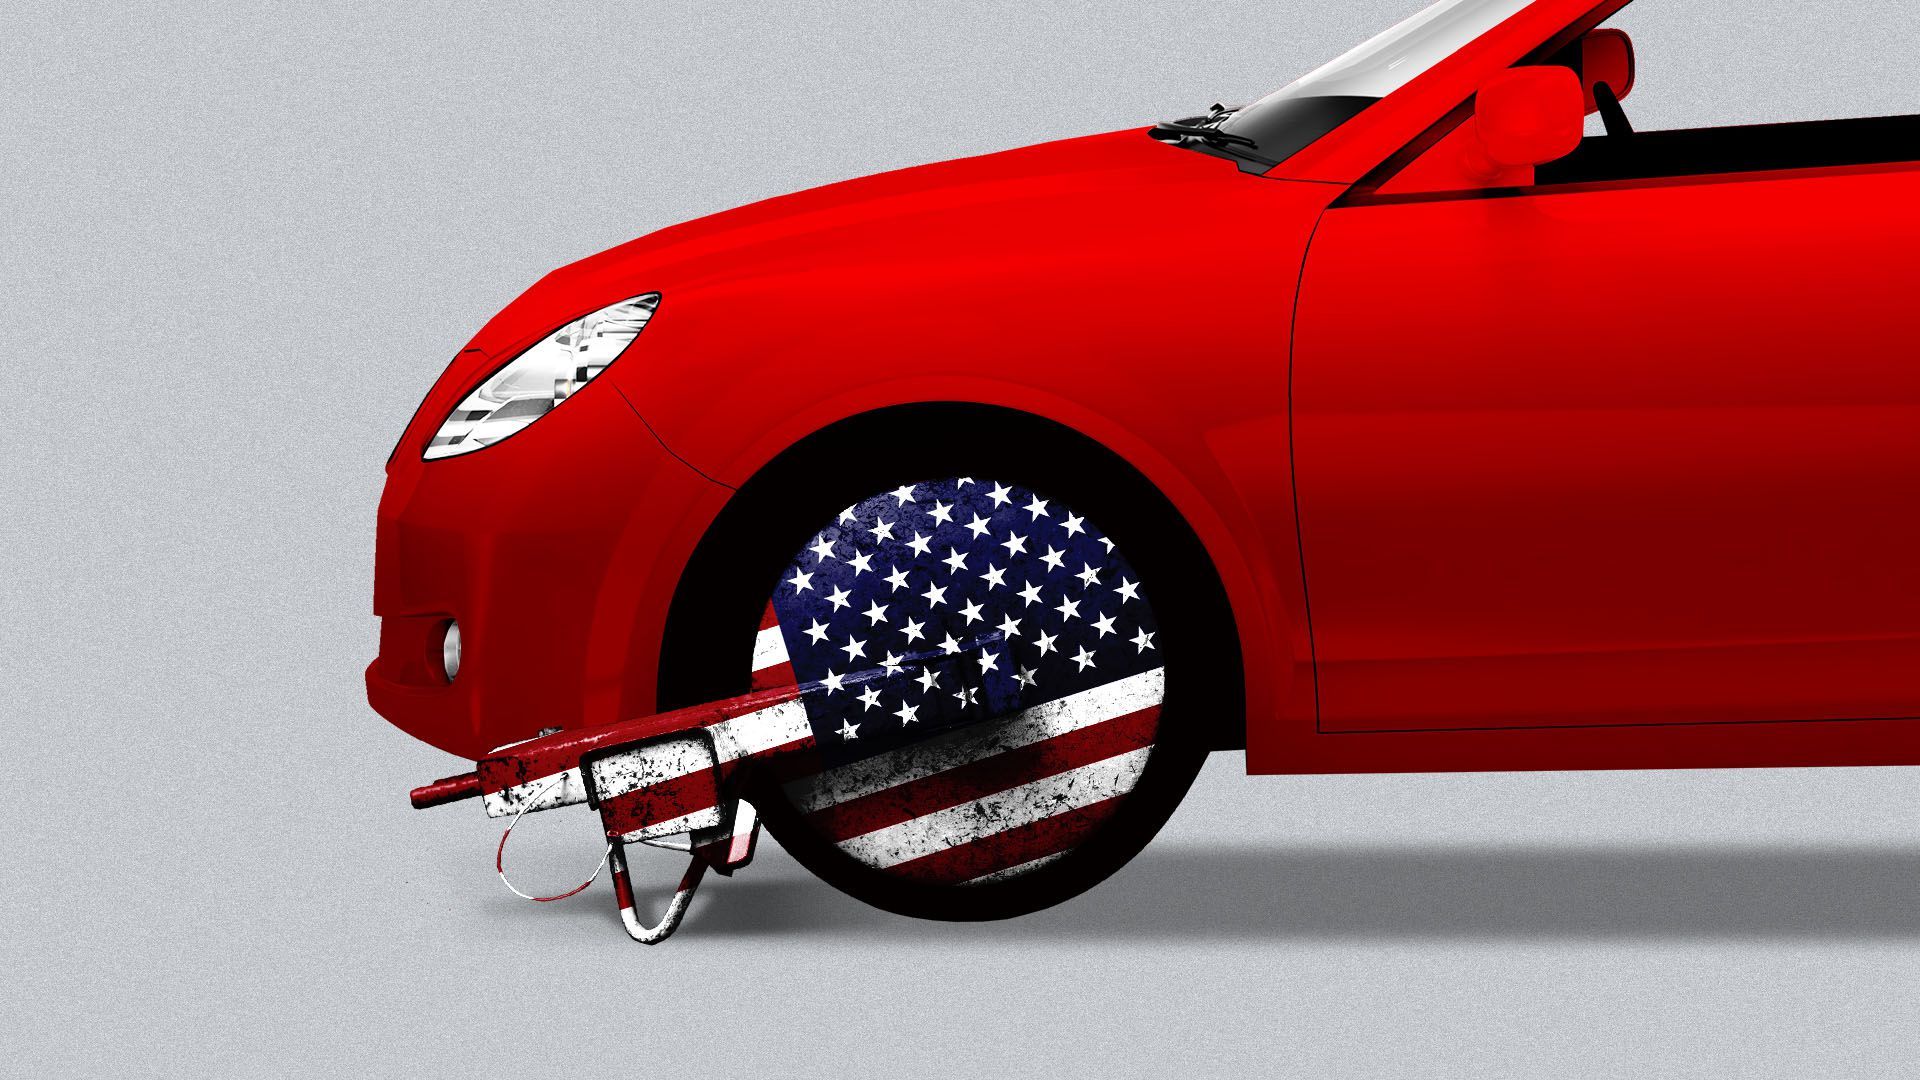 Illustration of a red car with U.S. carjack